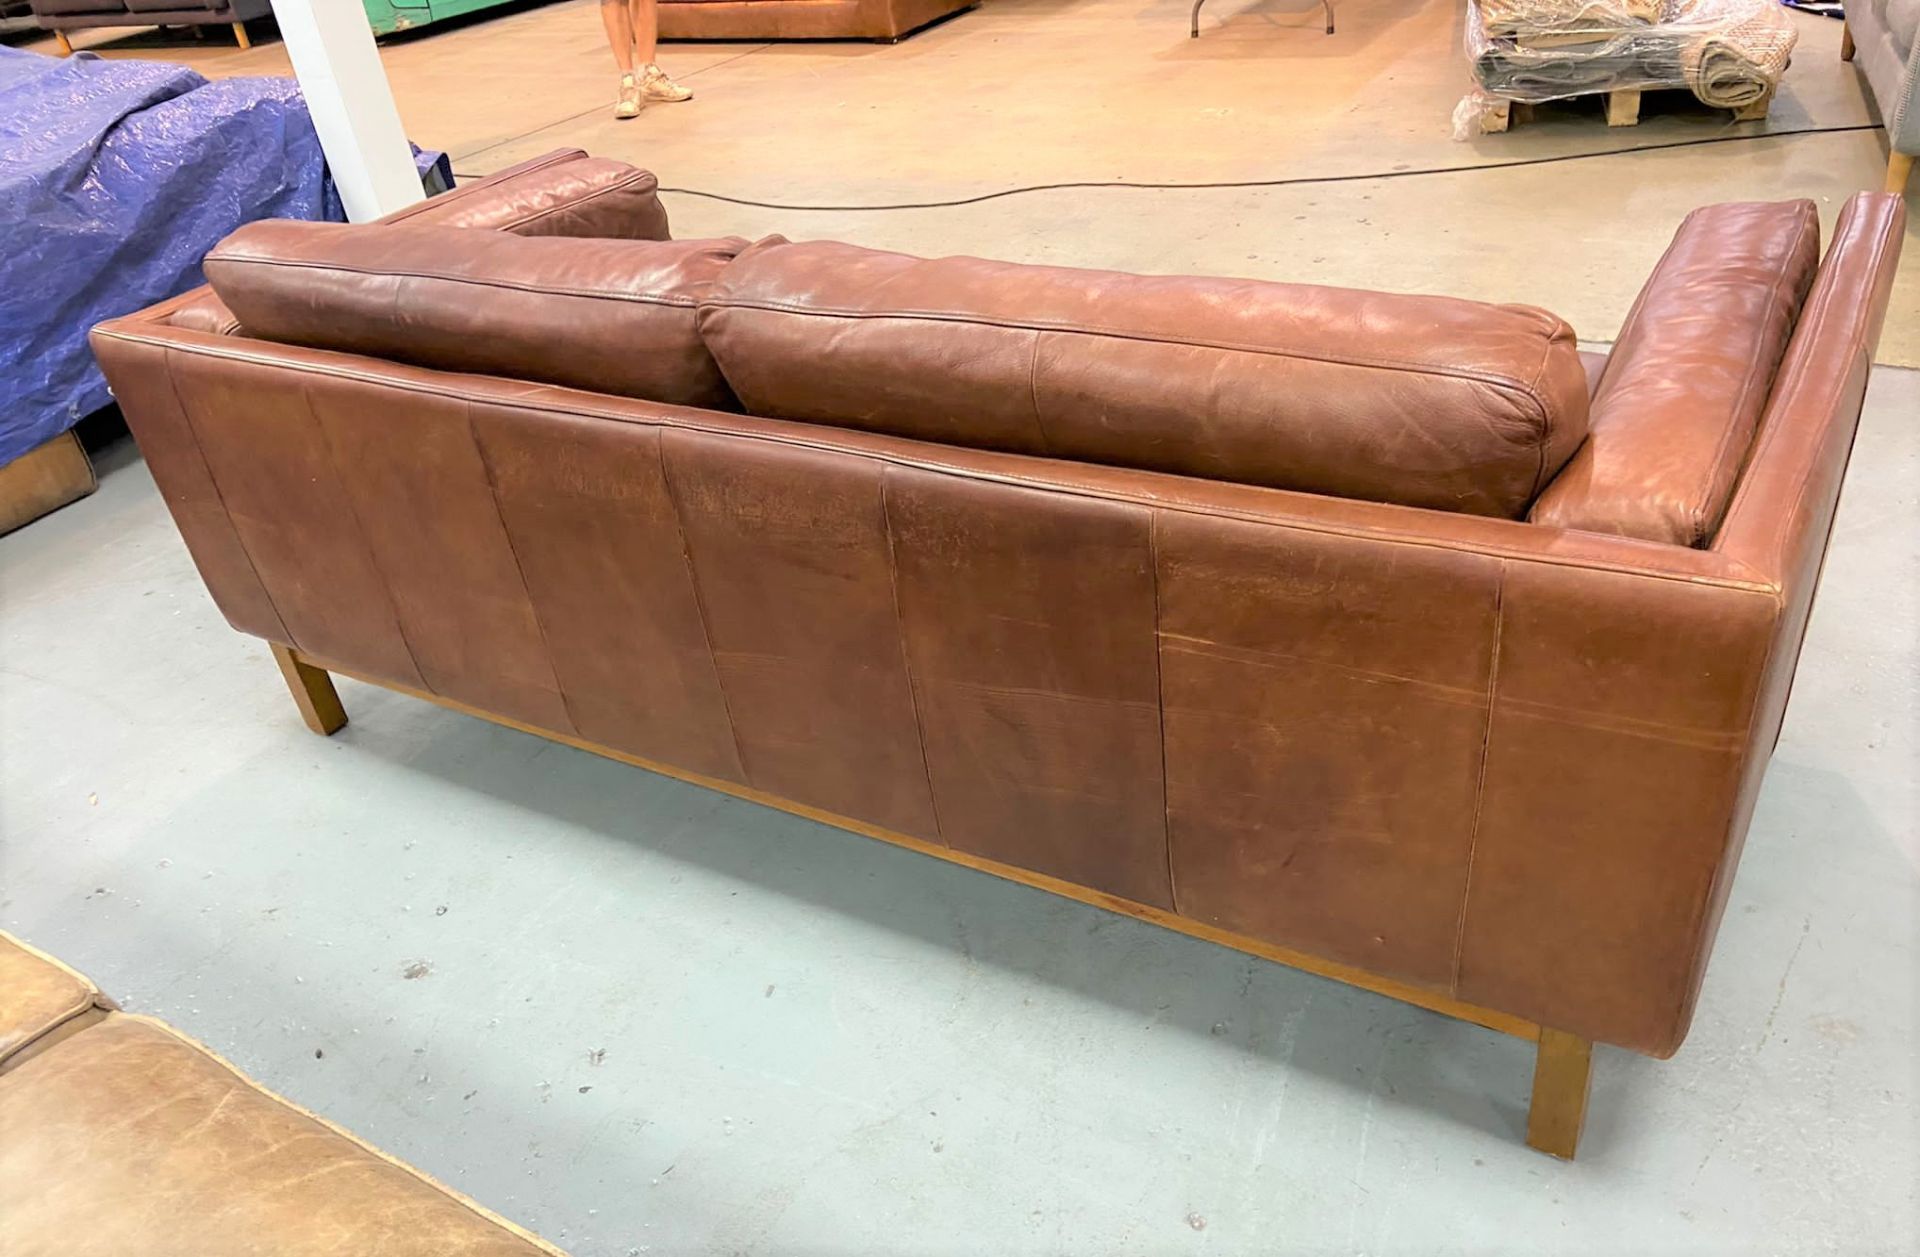 1 x West Elm Dekalb Contemporary Three Seater Sofa - Upholstered in Quality Tan Leather With Oak Fee - Image 2 of 6